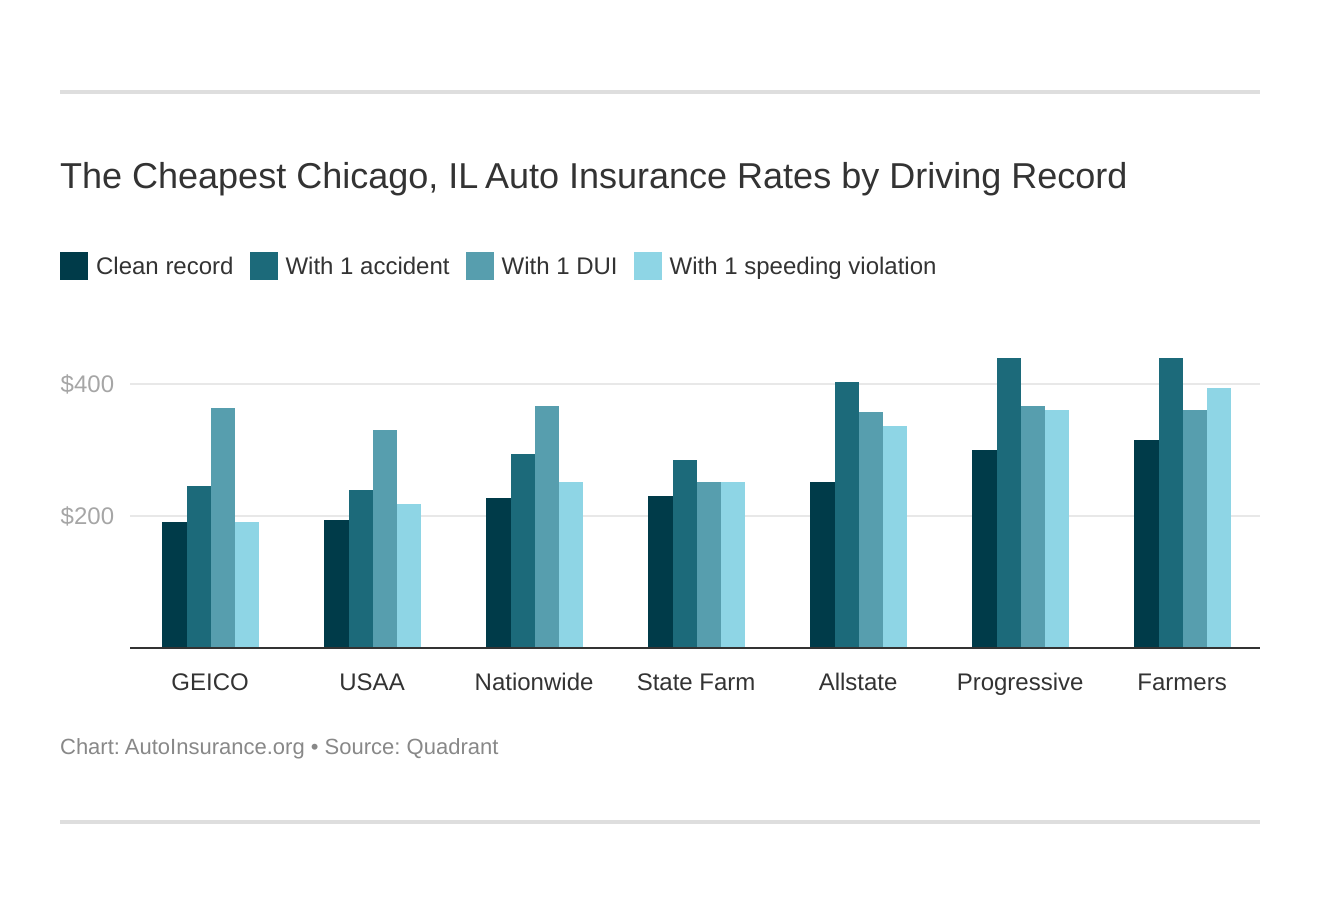 The Cheapest Chicago, IL Auto Insurance Rates by Driving Record